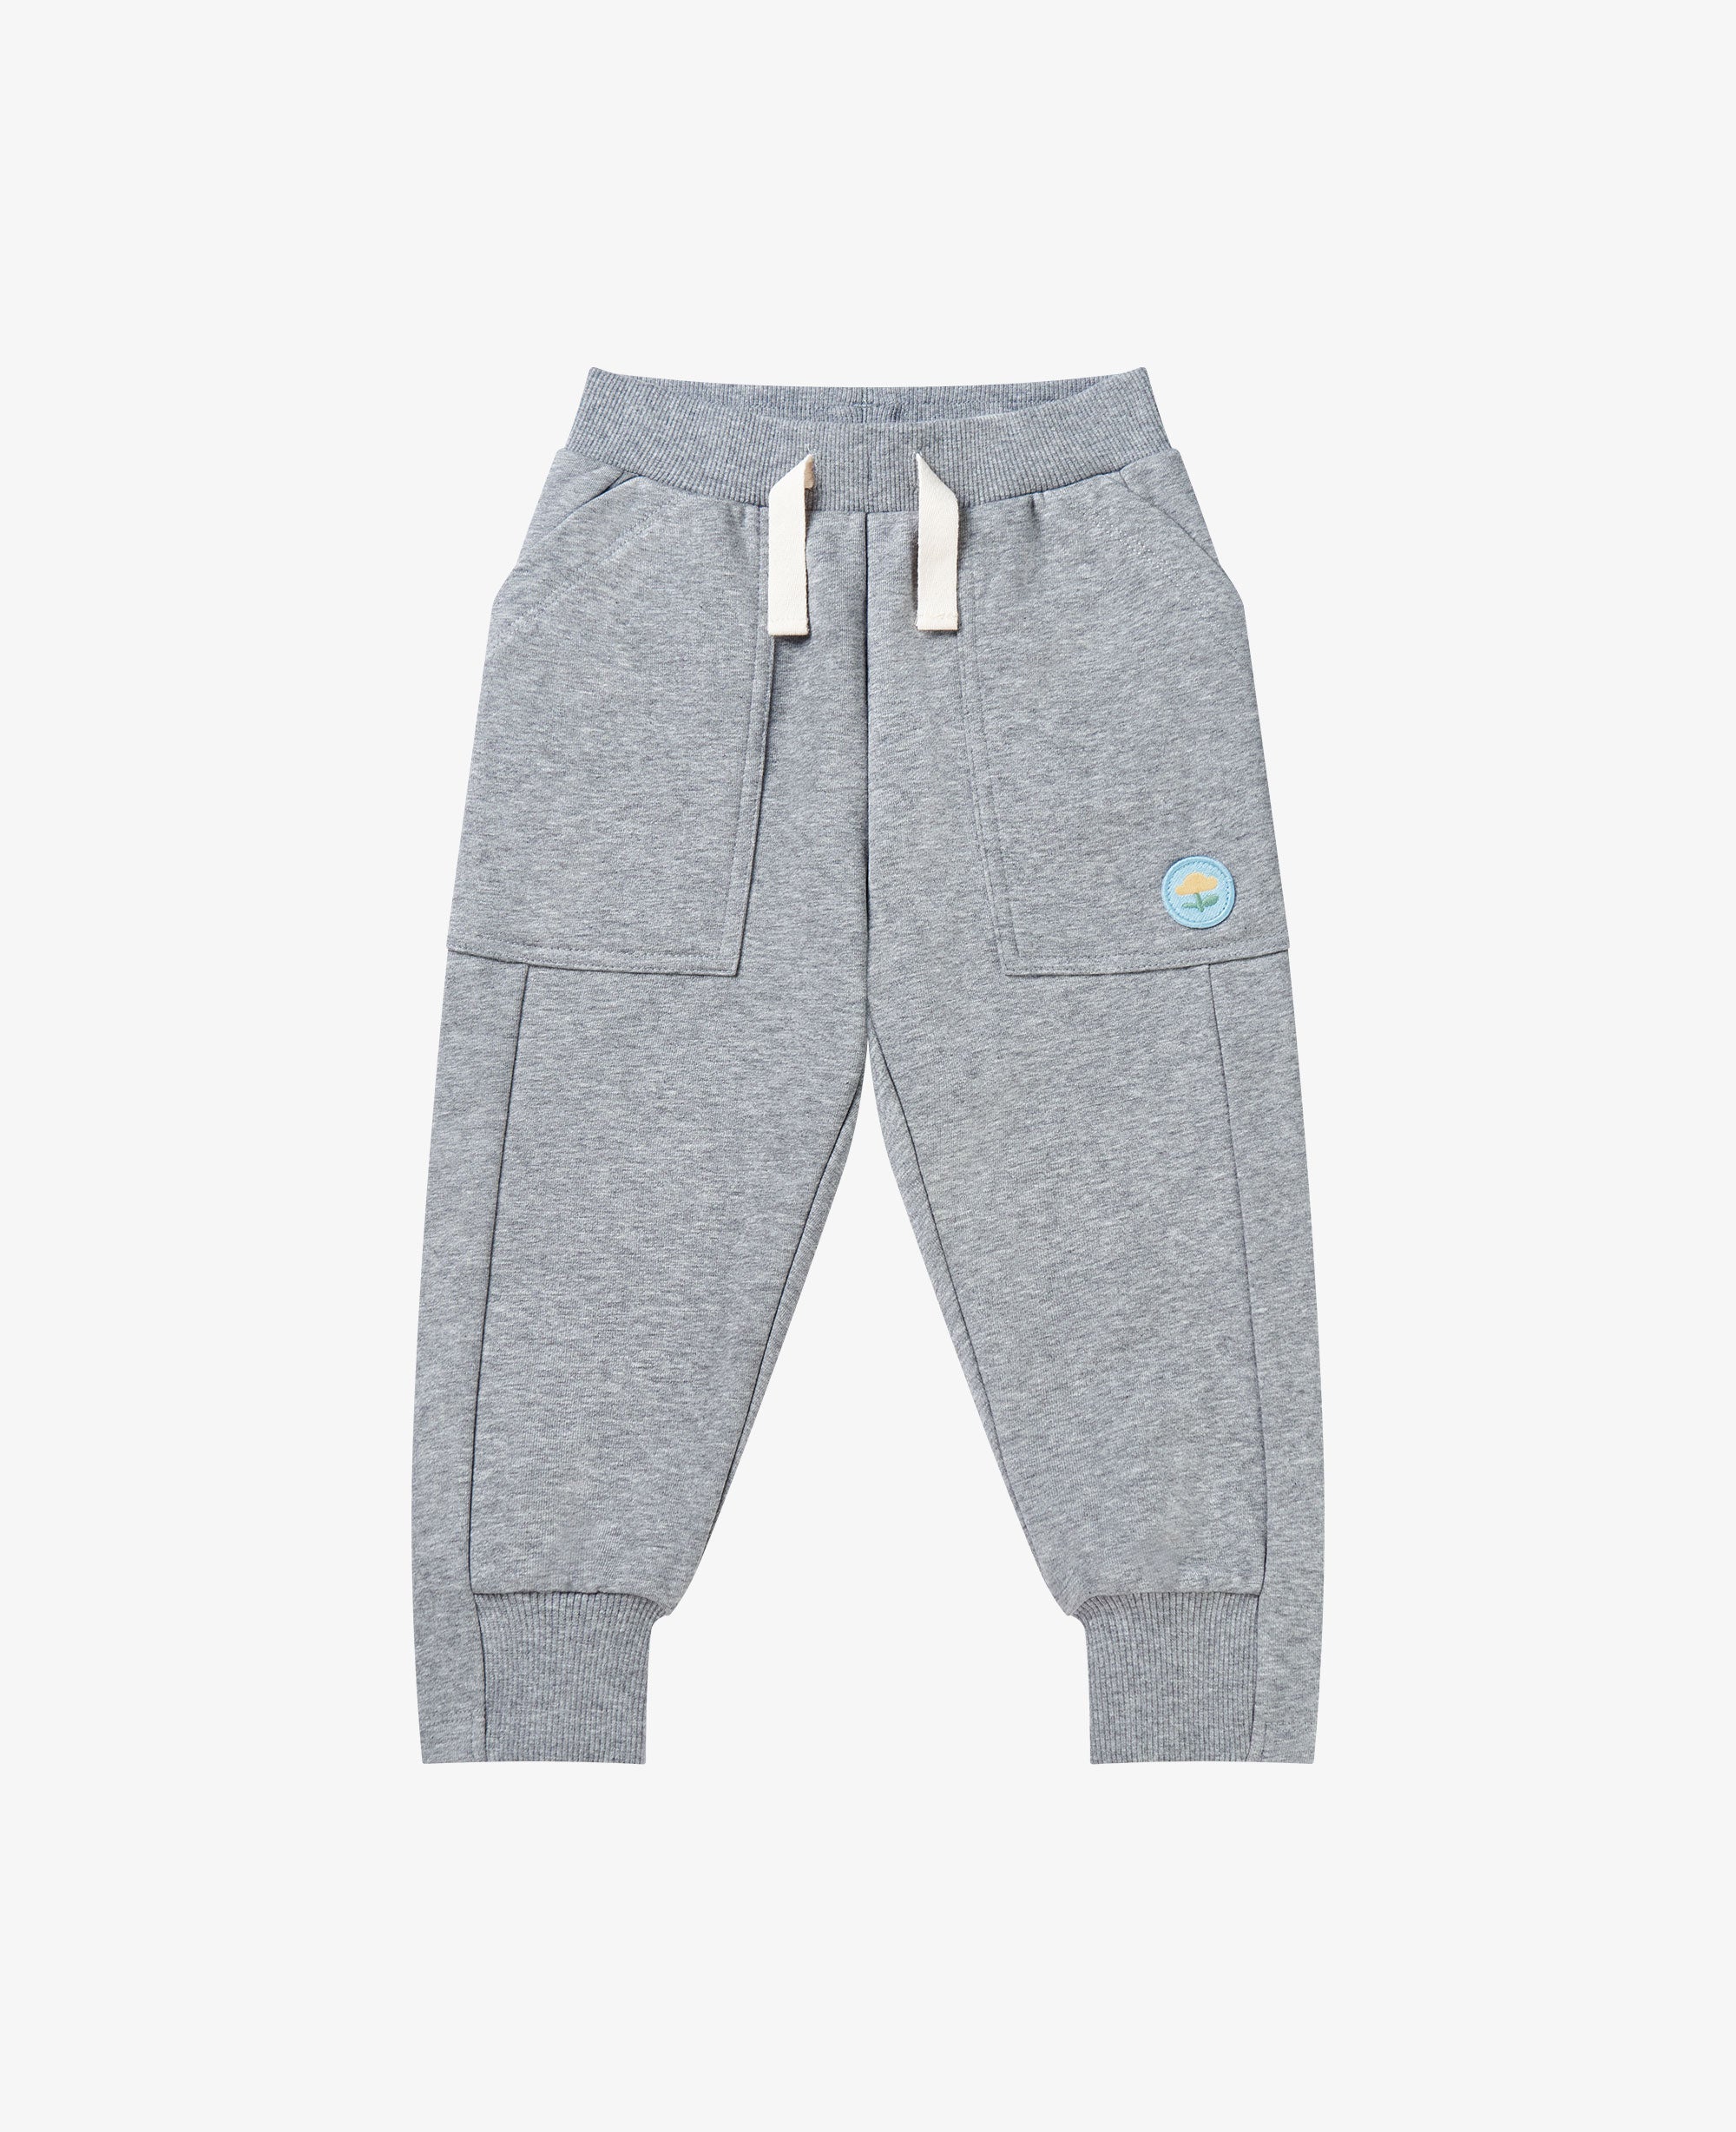 French Terry Jogger - Mist – Petite Revery